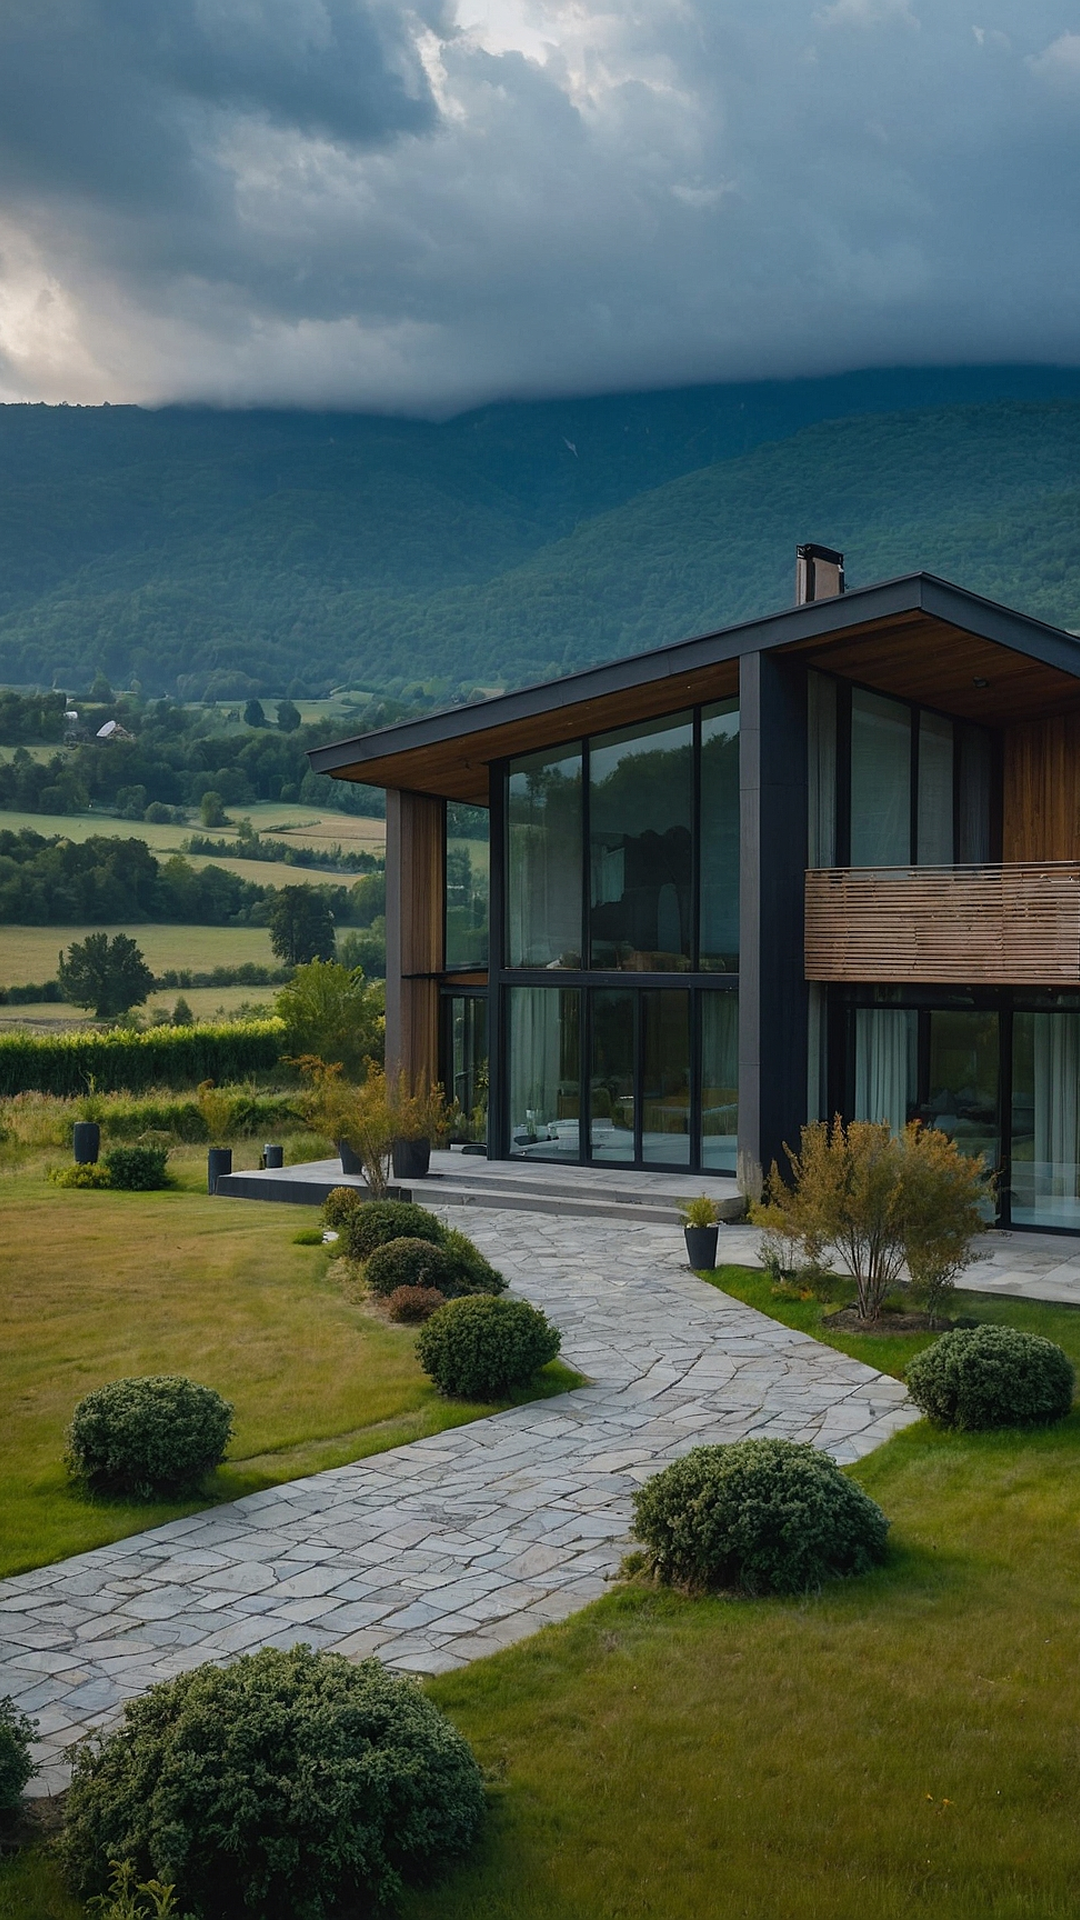 Sleek Rural Living: Trendy House Designs for the Countryside